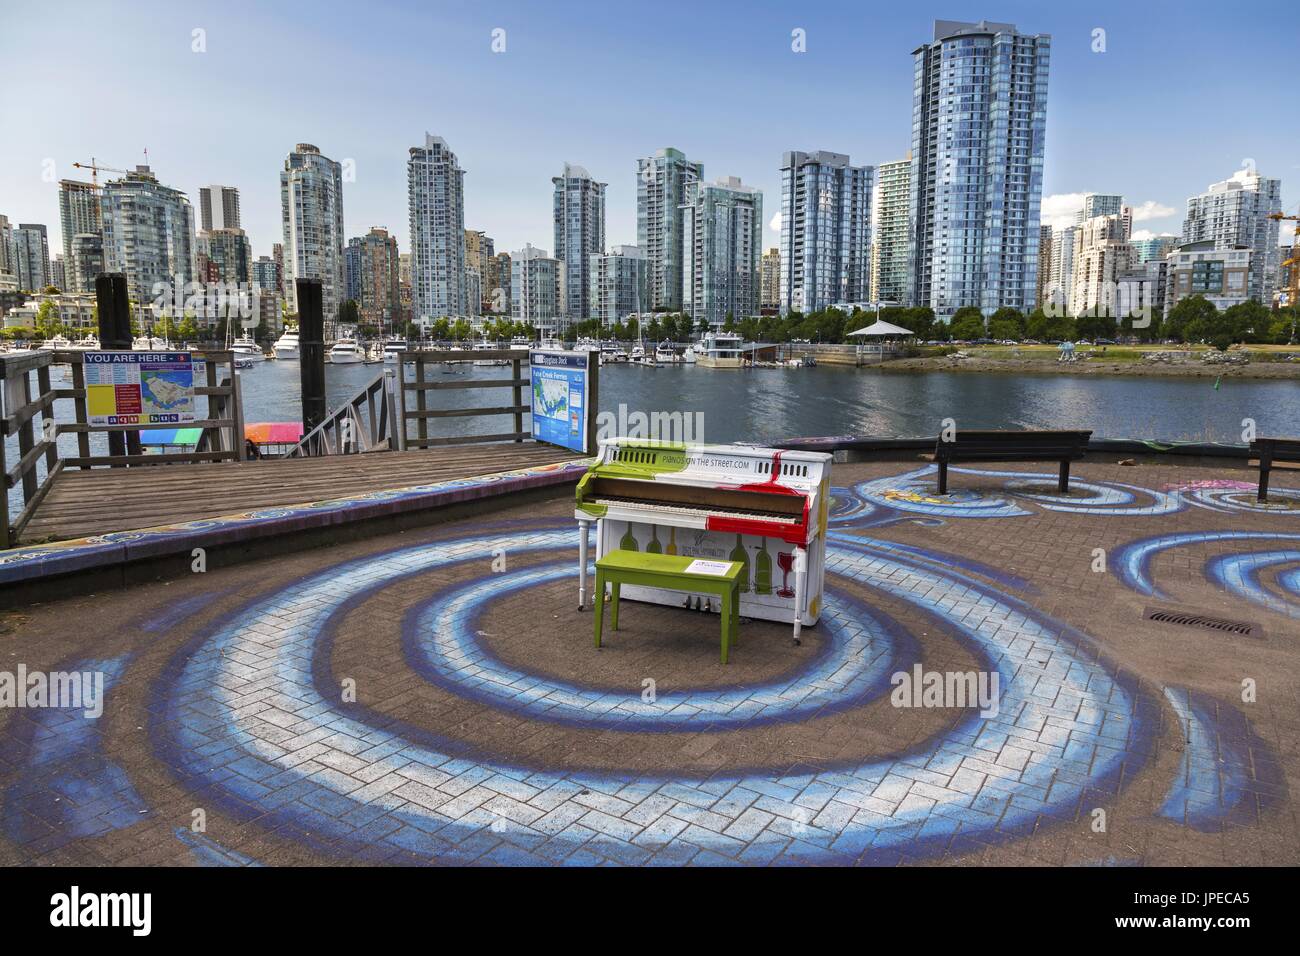 Piano Music Instrument on False Creek Seawall near Cambie Bridge Aquabus Water Taxi Terminal with view of Vancouver City Center Highrise Buildings Stock Photo